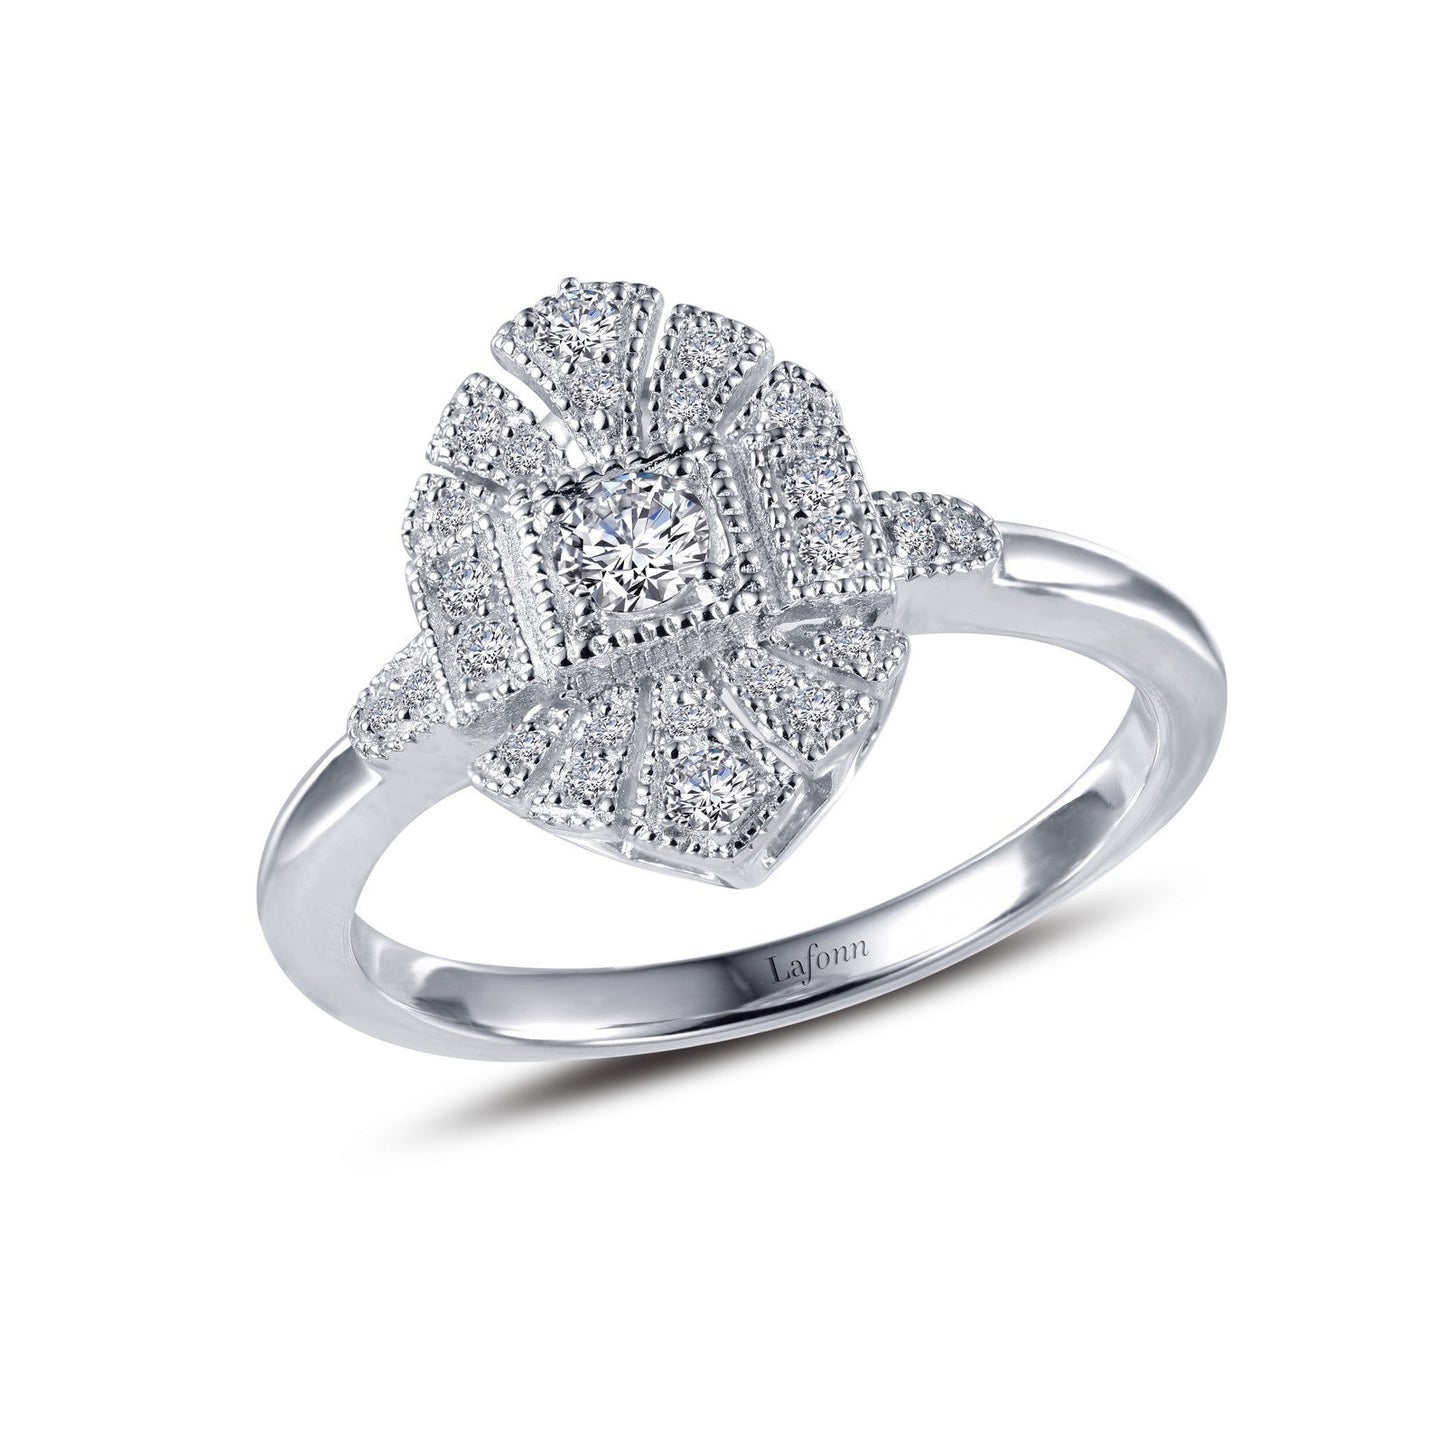 Load image into Gallery viewer, Lafonn Vintage Inspired Engagement Ring 25 Stone Count R0285CLP05
